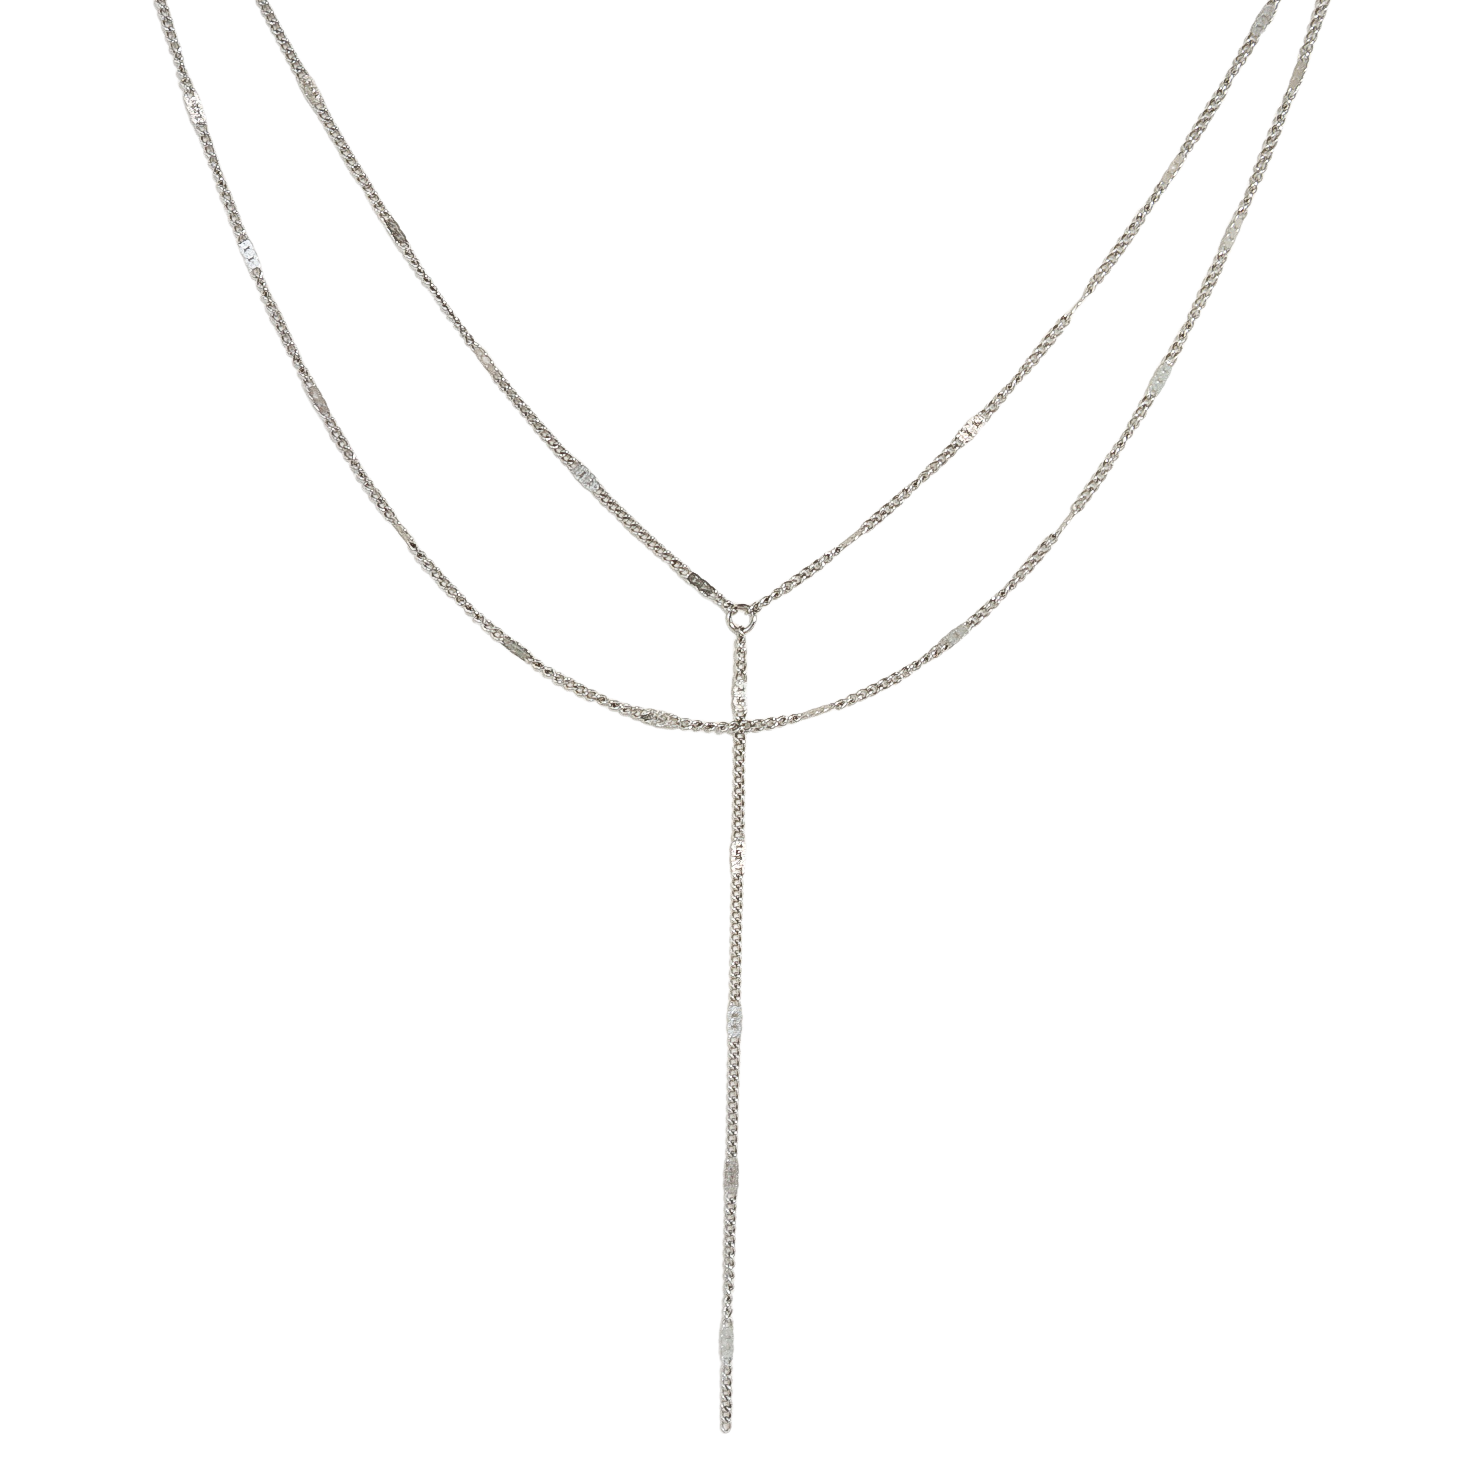 Silver Layered Lariat Necklace